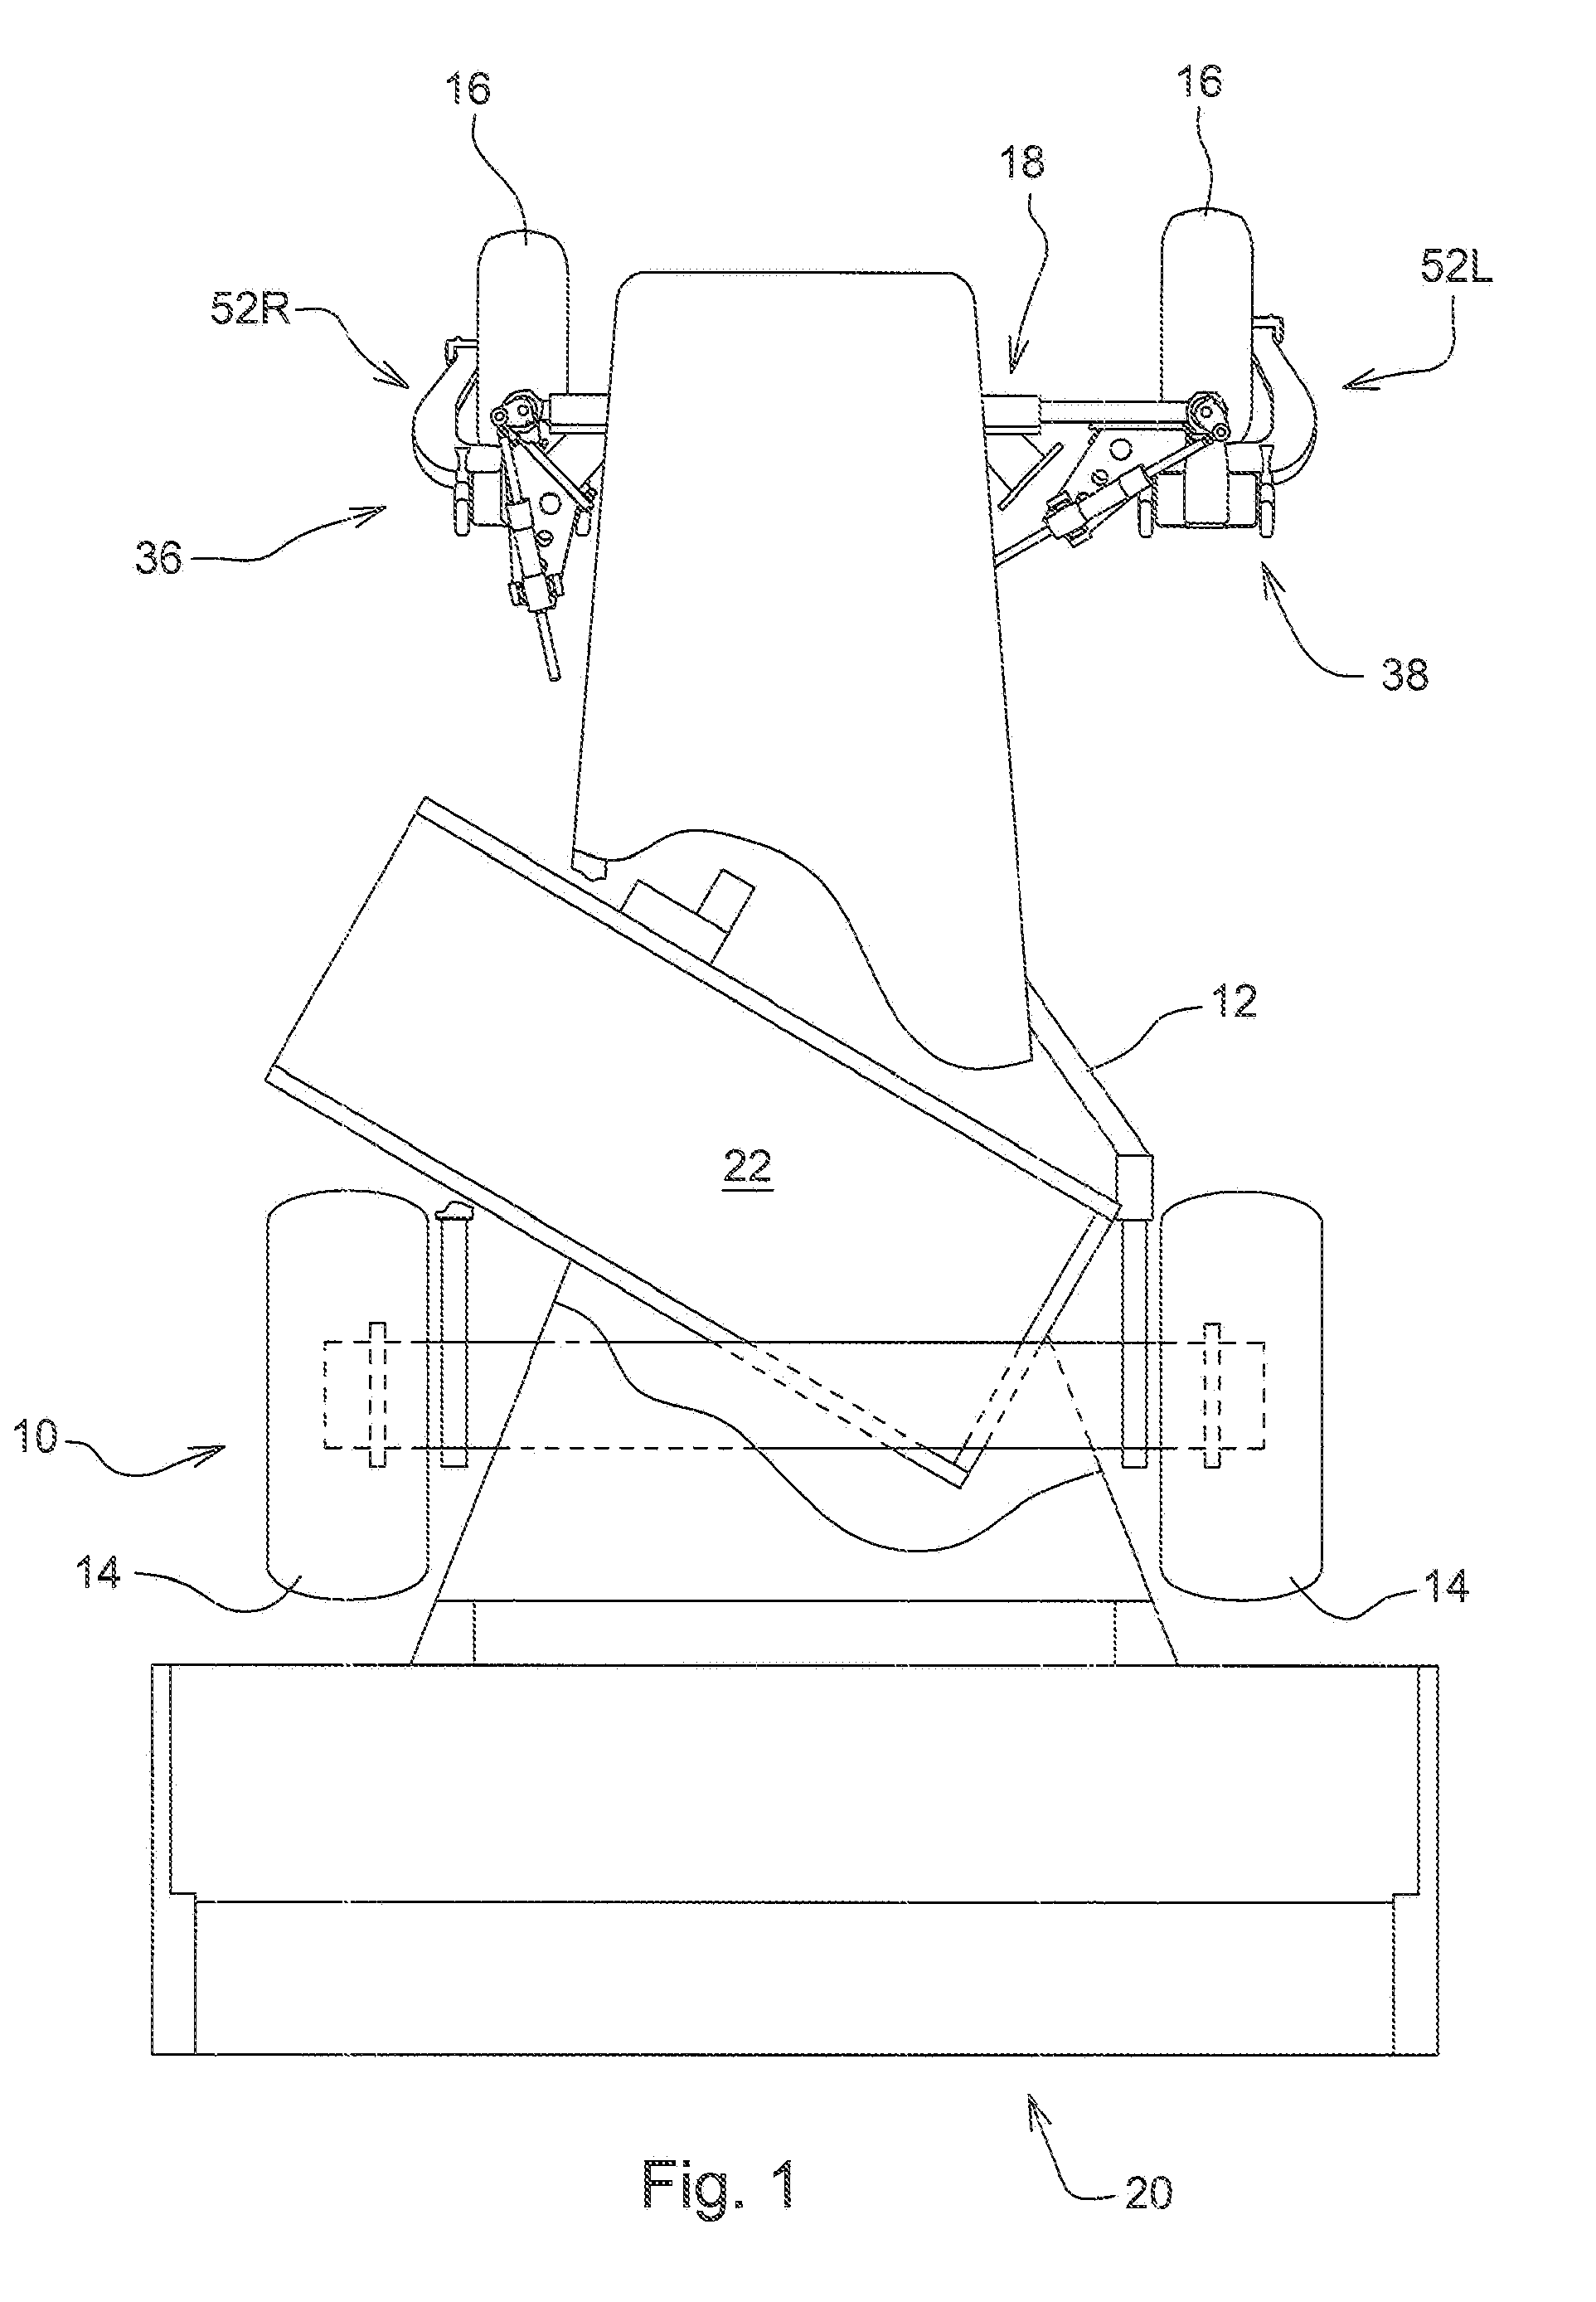 Steering Cylinder Mounting Arrangement Used With A Length-Adjustable Axle